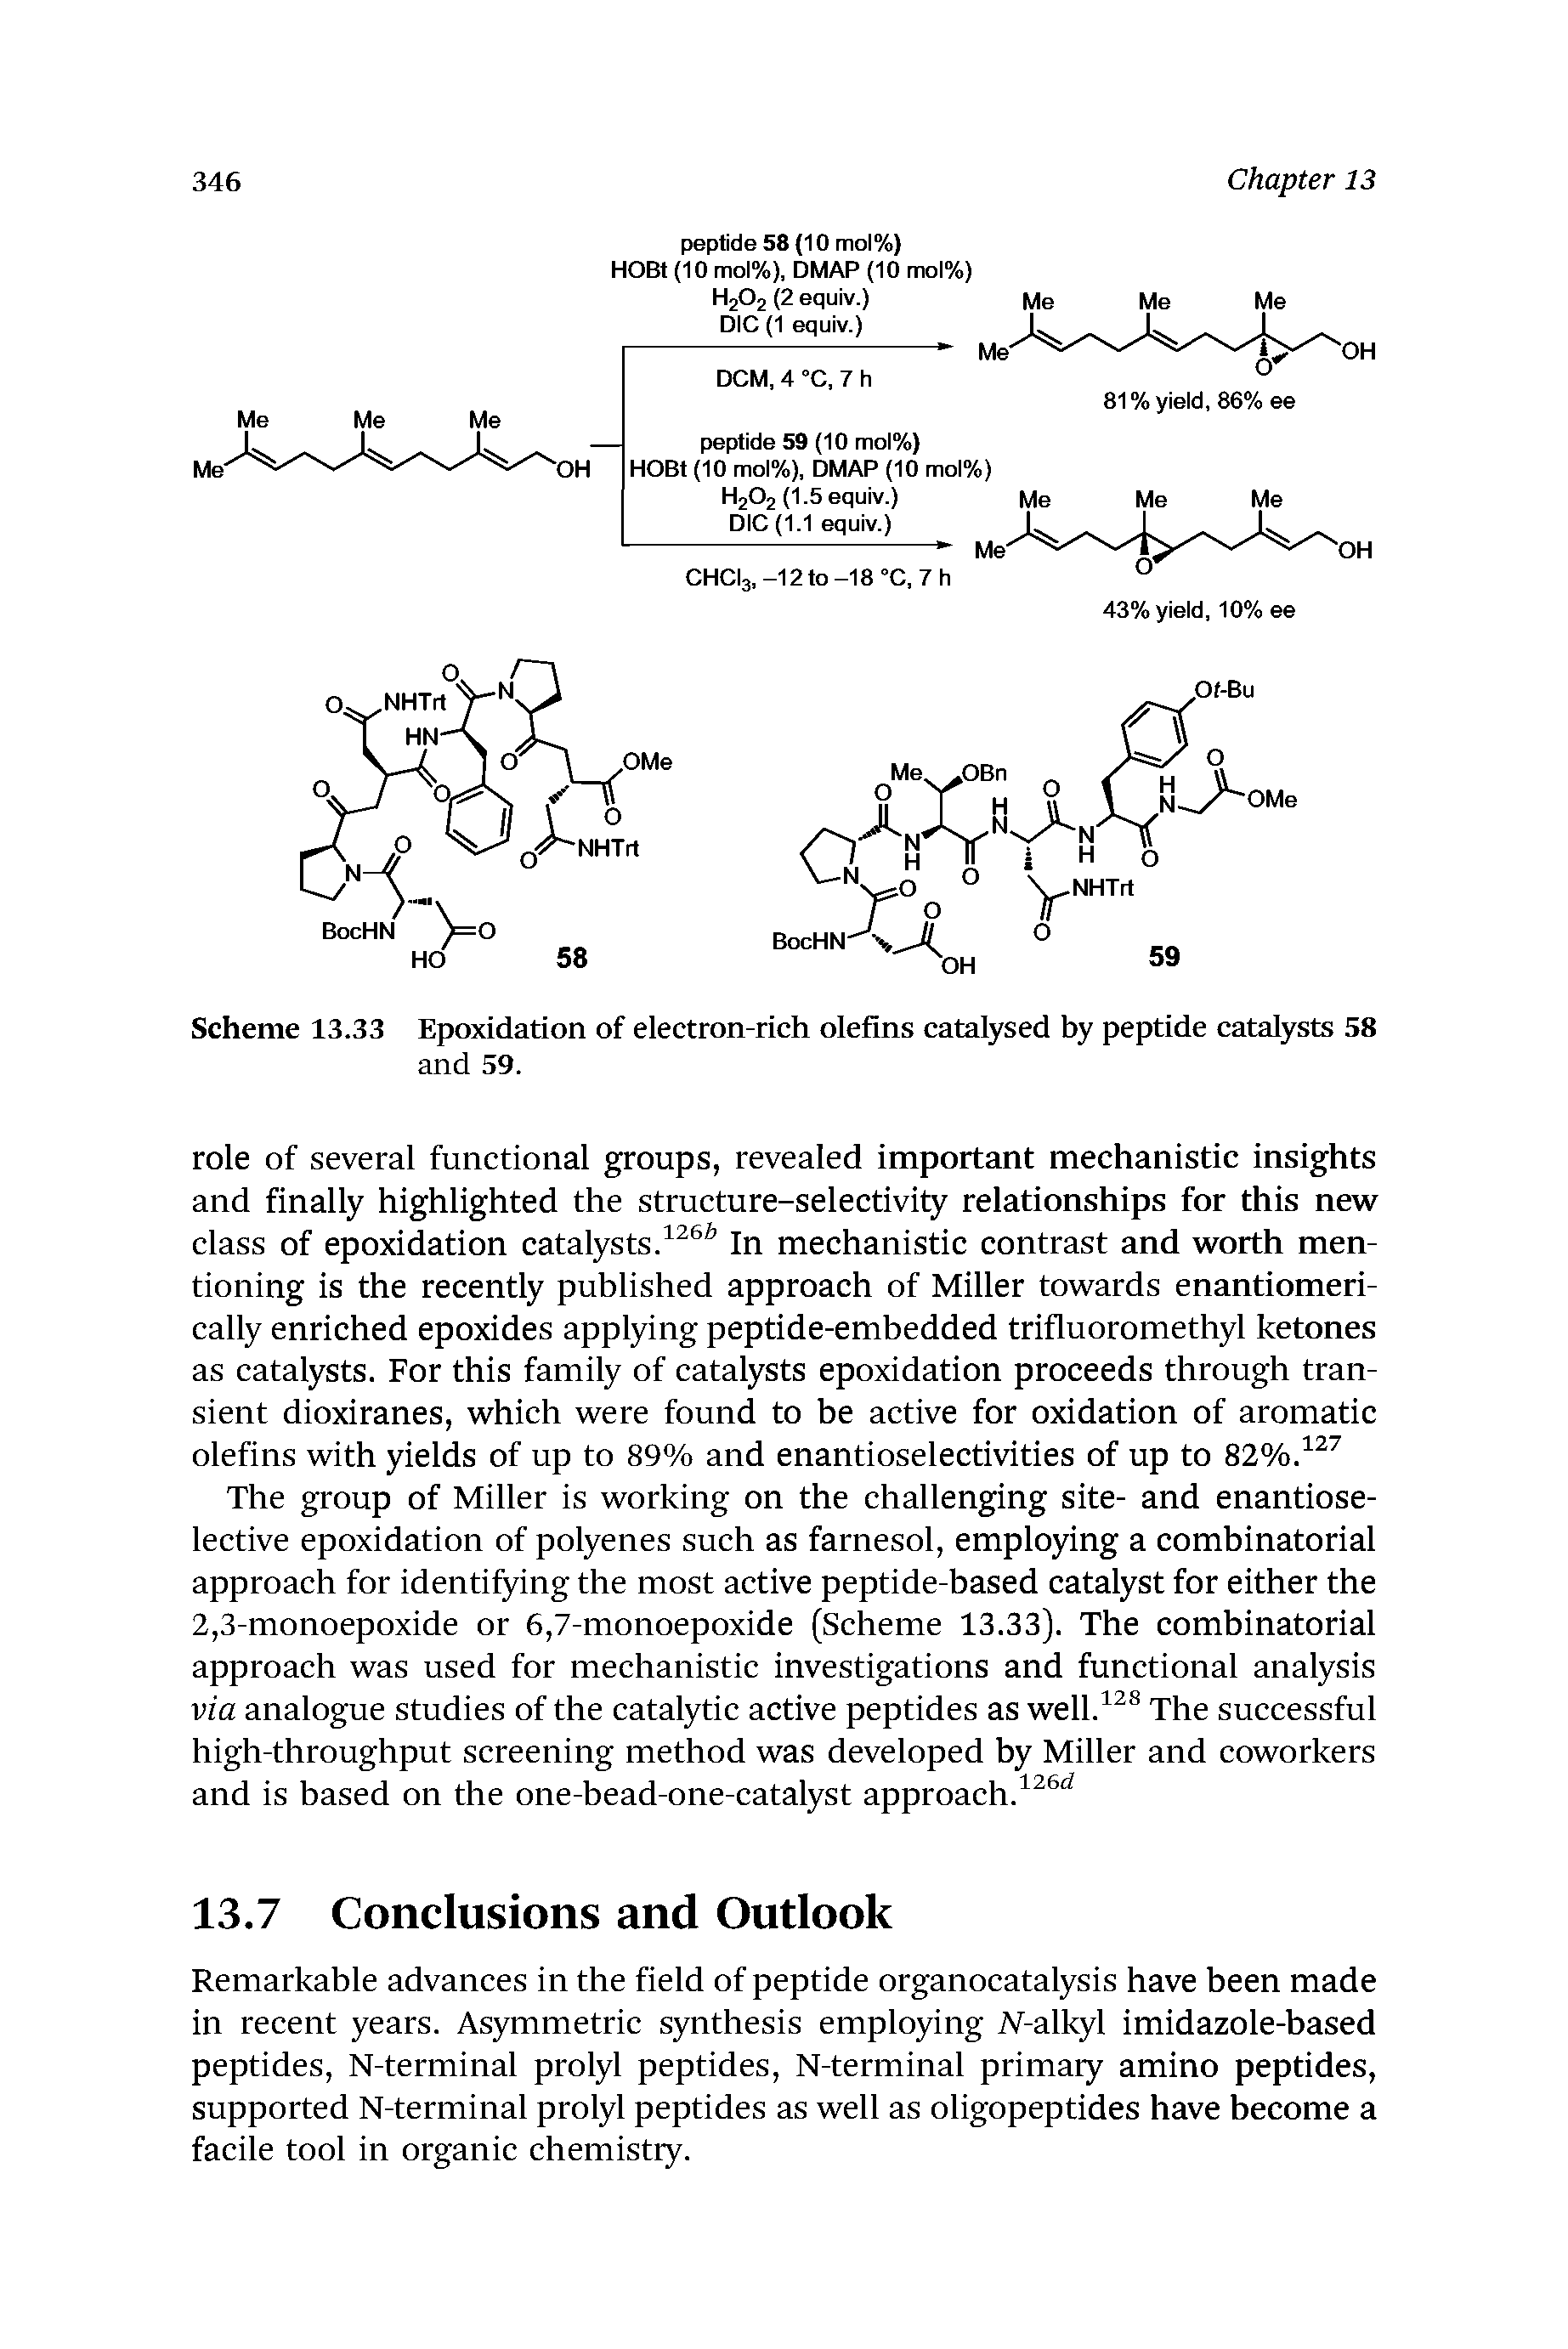 Scheme 13.33 Epoxidation of electron-rich olefins catalysed by peptide catalysts 58 and 59.